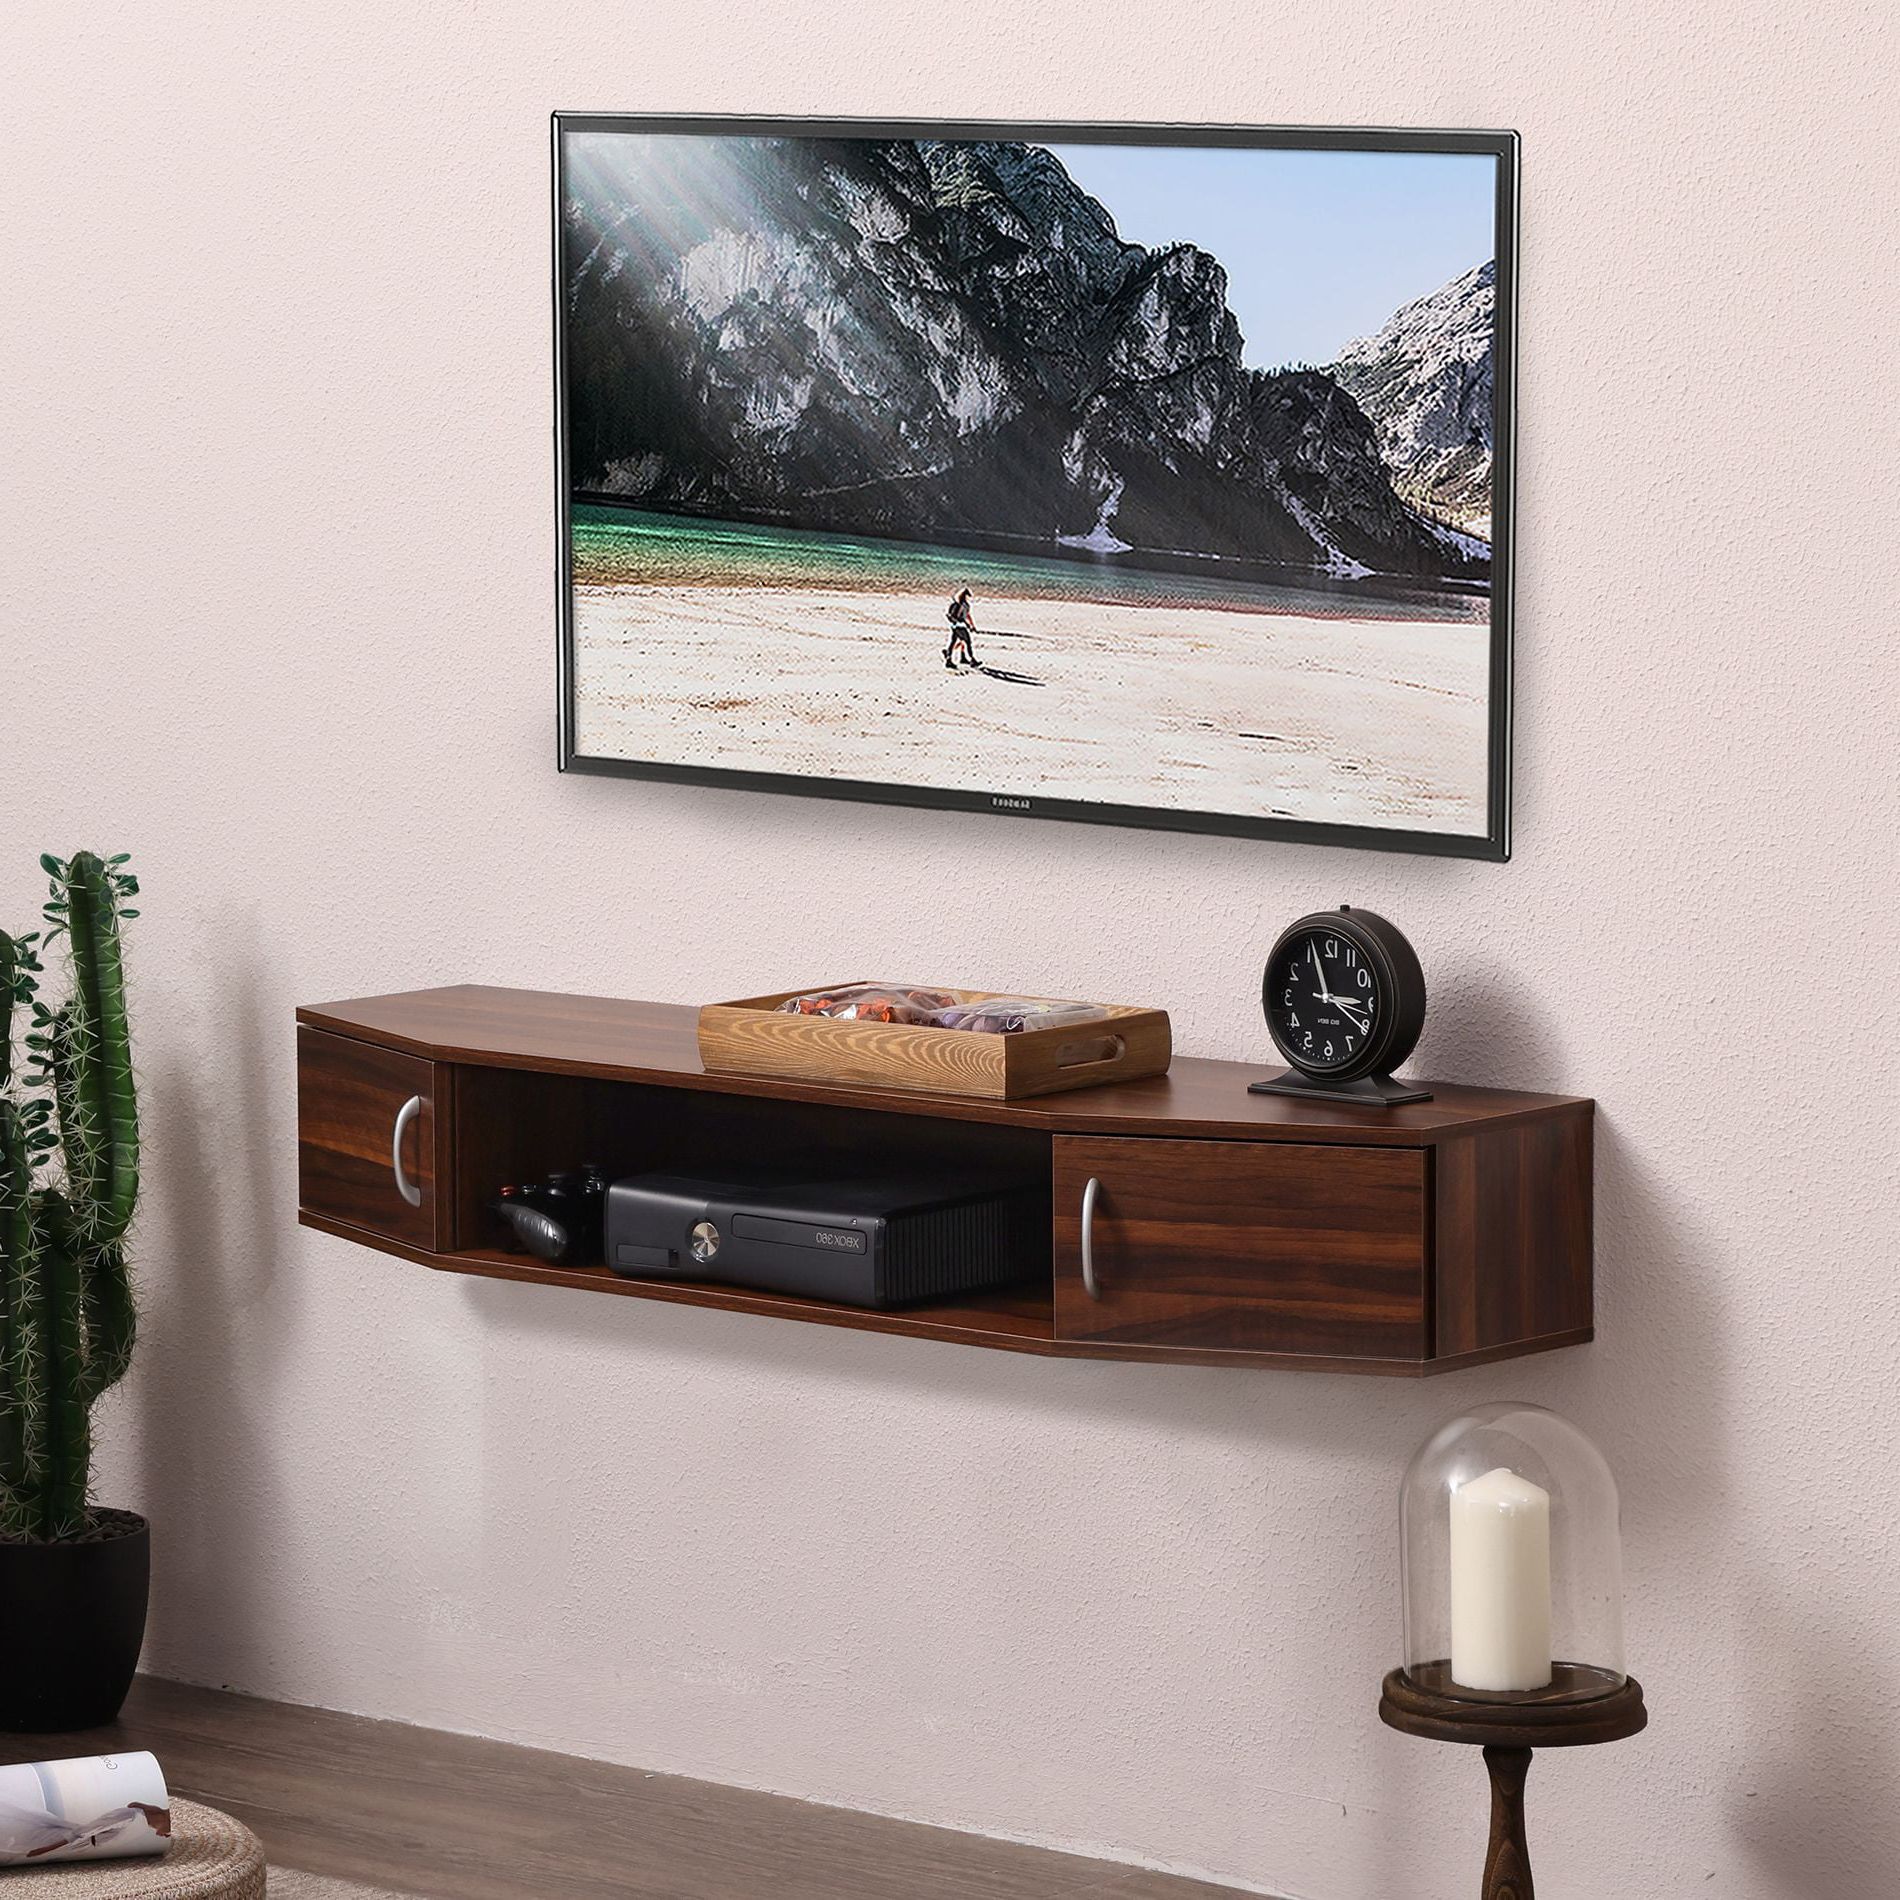 Fashionable Floating Stands For Tvs Regarding Fitueyes Floating Tv Stand Wall Mounted Entertainment Center Media (View 14 of 15)